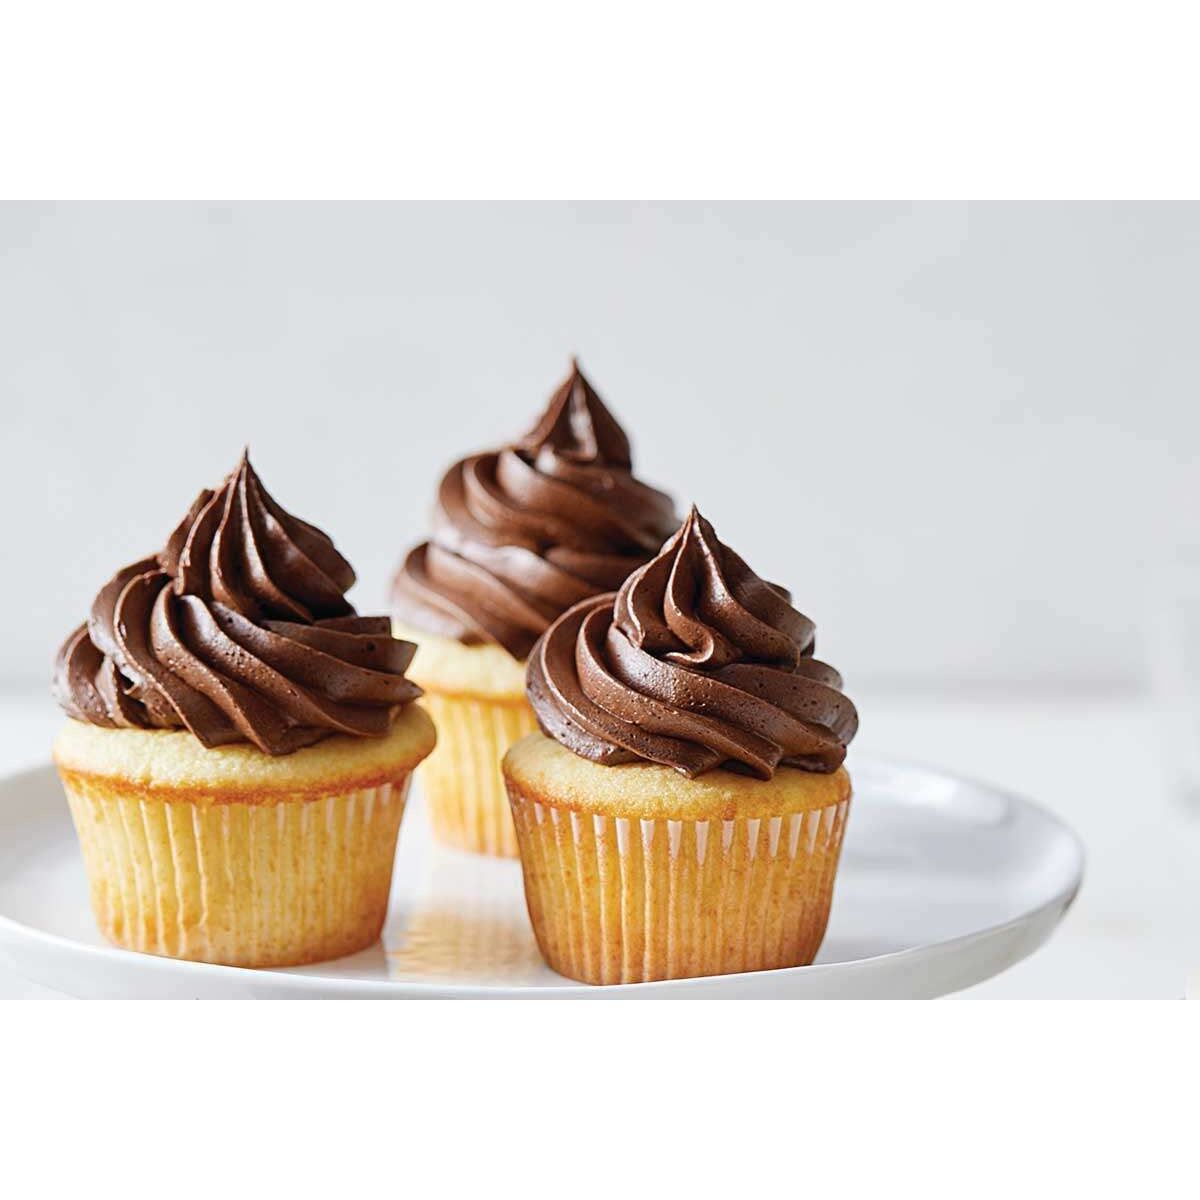 Vanilla Cupcakes w/ Chocolate Frosting, Business Pre-order